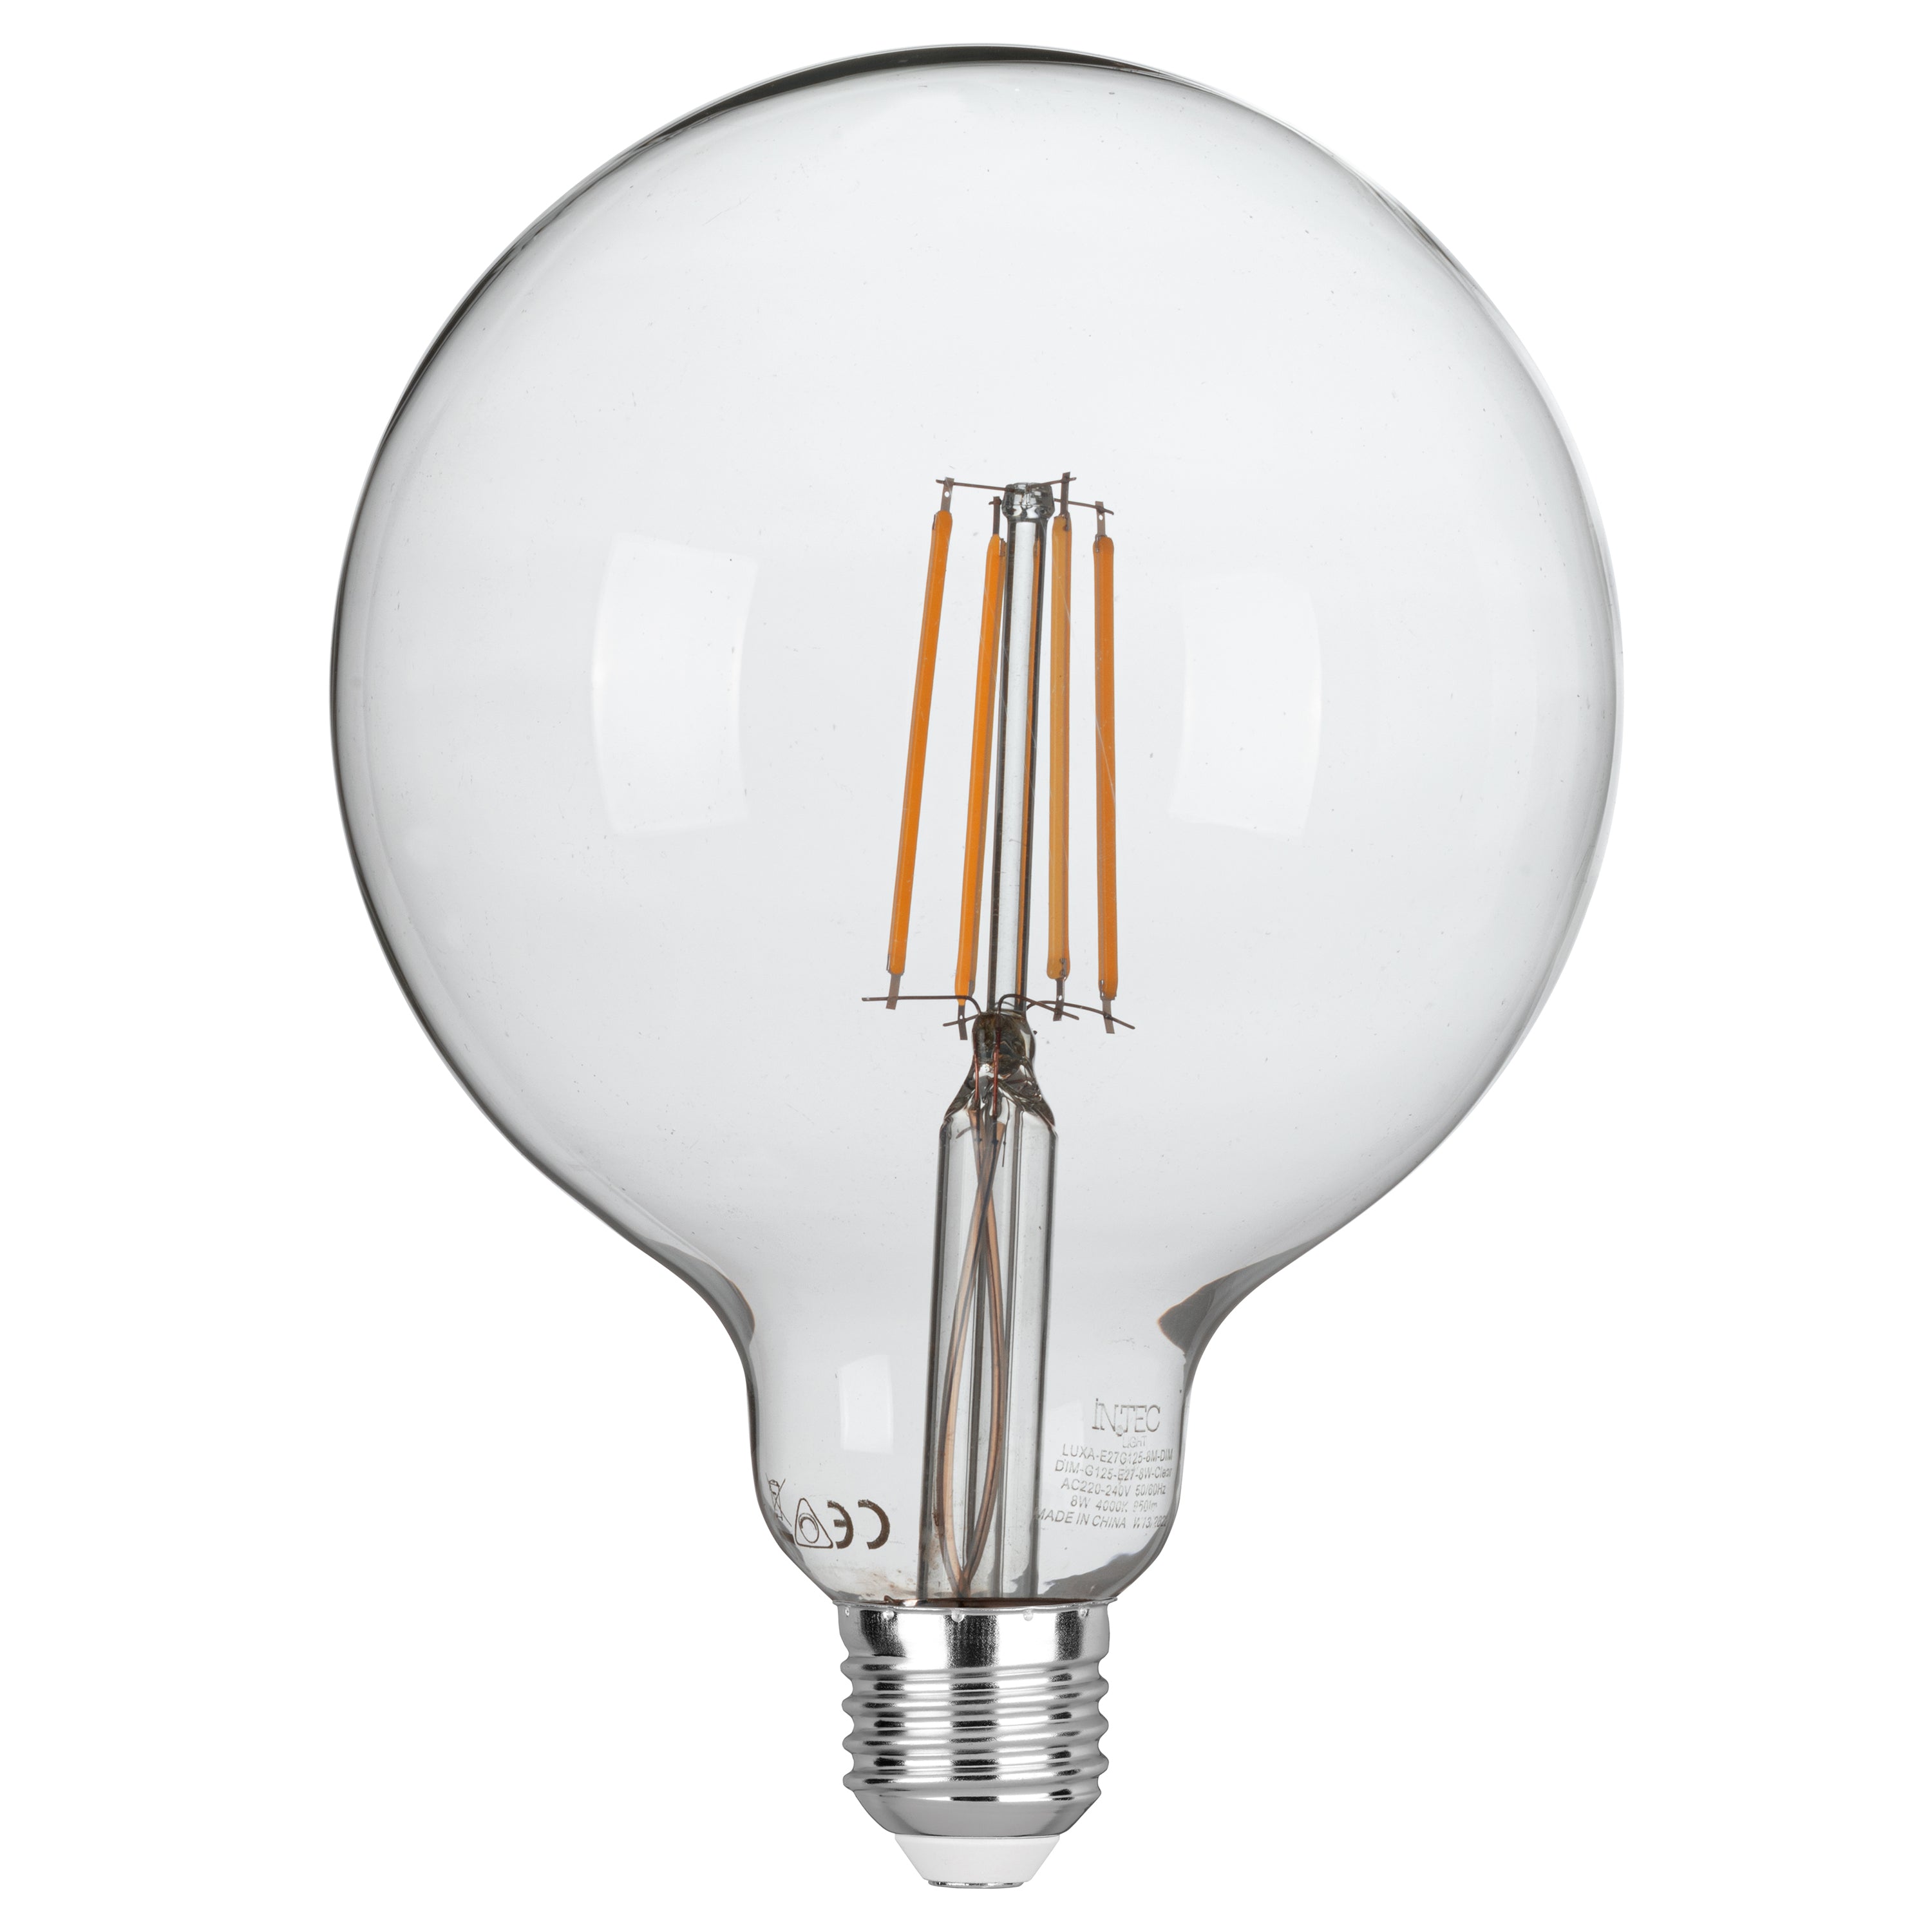 LUXA Ampoule LED filament globe dimmable E27 8W 1500L 125mm 